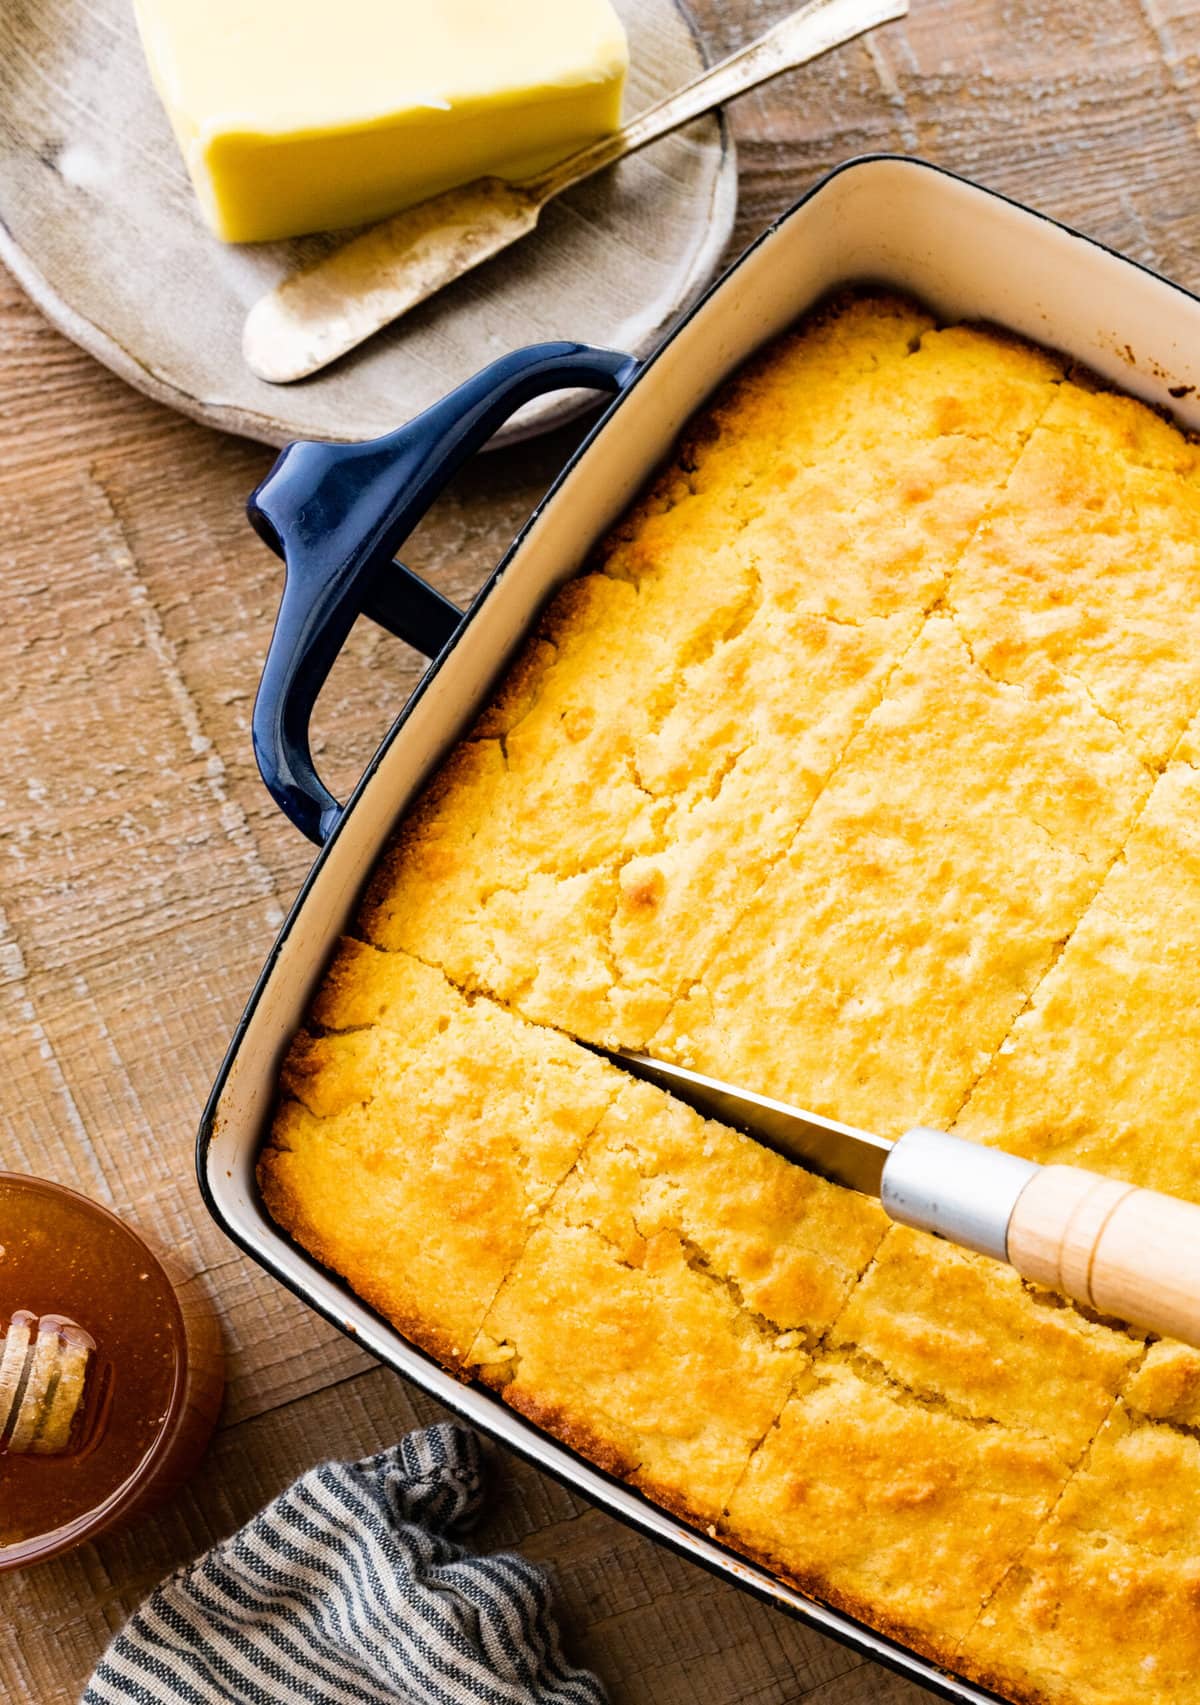 cutting the baked sweet cornbread recipe with a sharp knife.